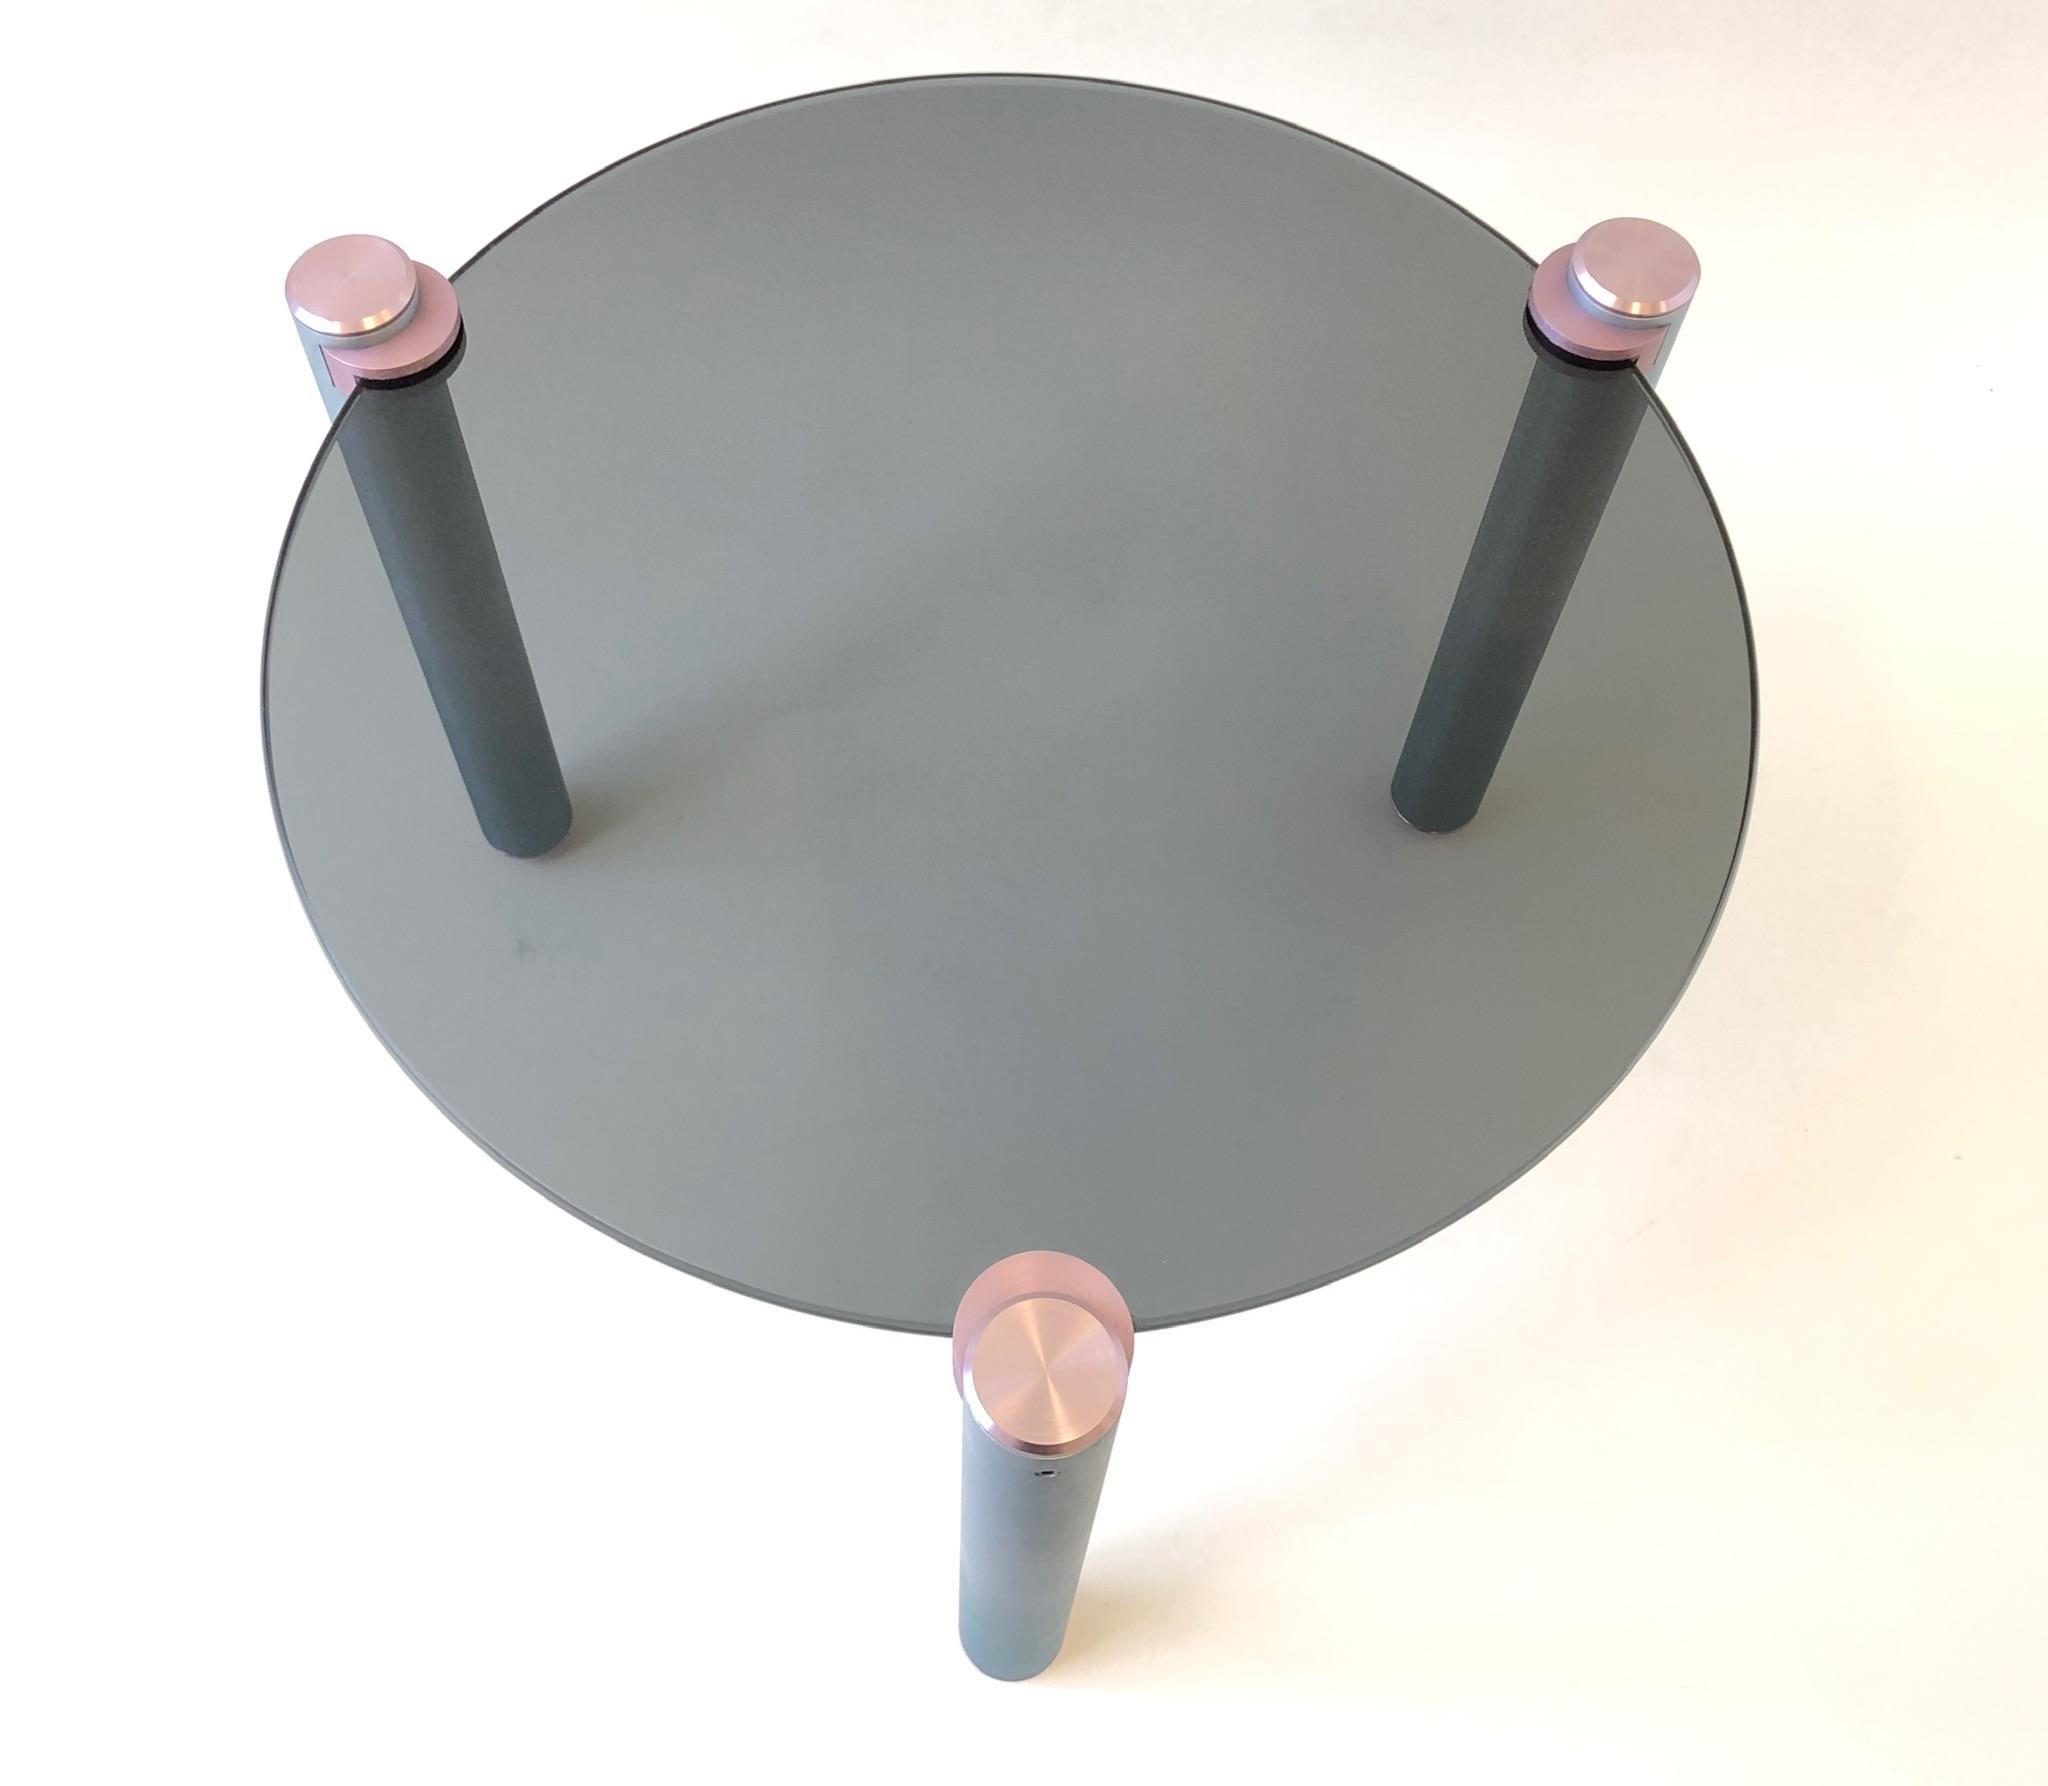 A beautiful 1980s Postmodern tripod side table. The table is constructed of brush aluminum legs that are painted lite pink and blue with a smoked glass top. It can be turned in to a larger cocktail table if desired. The glass top is 22” in diameter